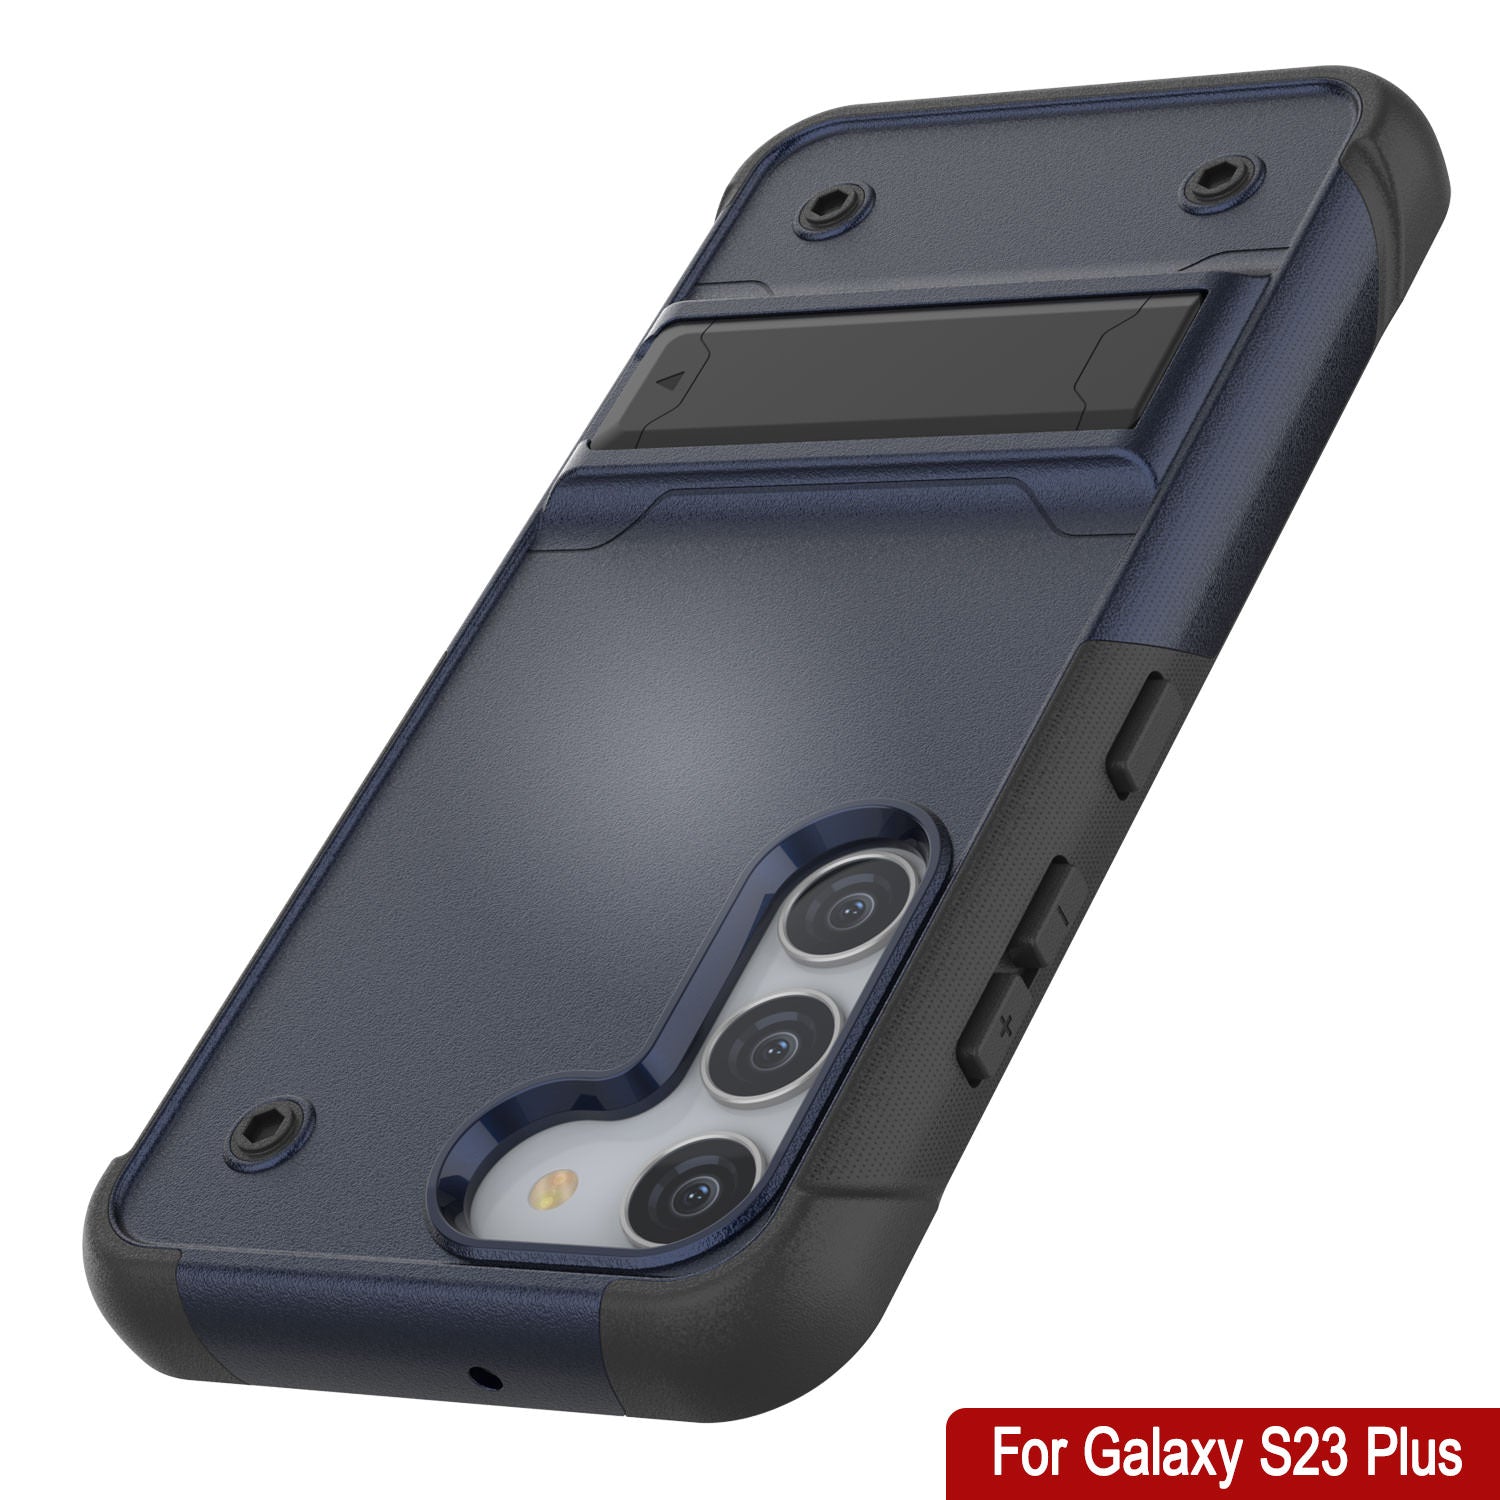 Punkcase Galaxy S24+ Plus Case [Reliance Series] Protective Hybrid Military Grade Cover W/Built-in Kickstand [Navy-Black]